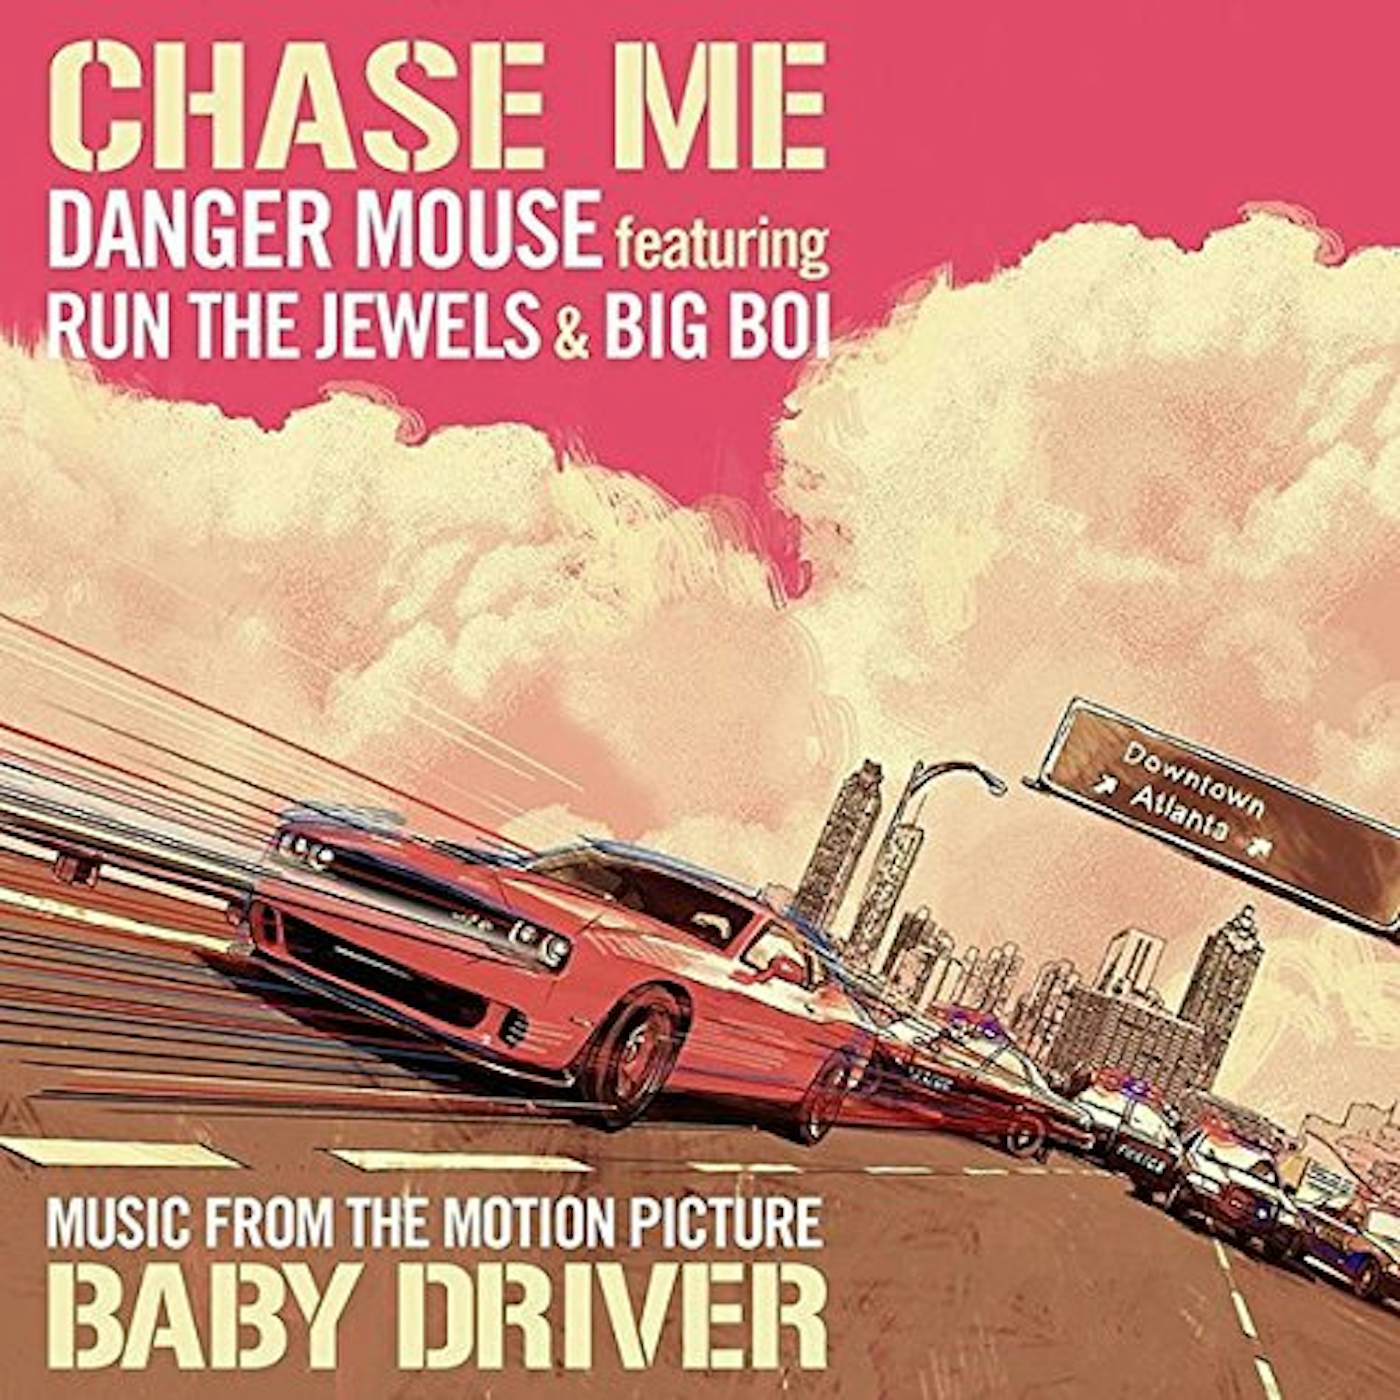 Danger Mouse Featuring Run The Jewels & Big Boi CHASE ME Vinyl Record